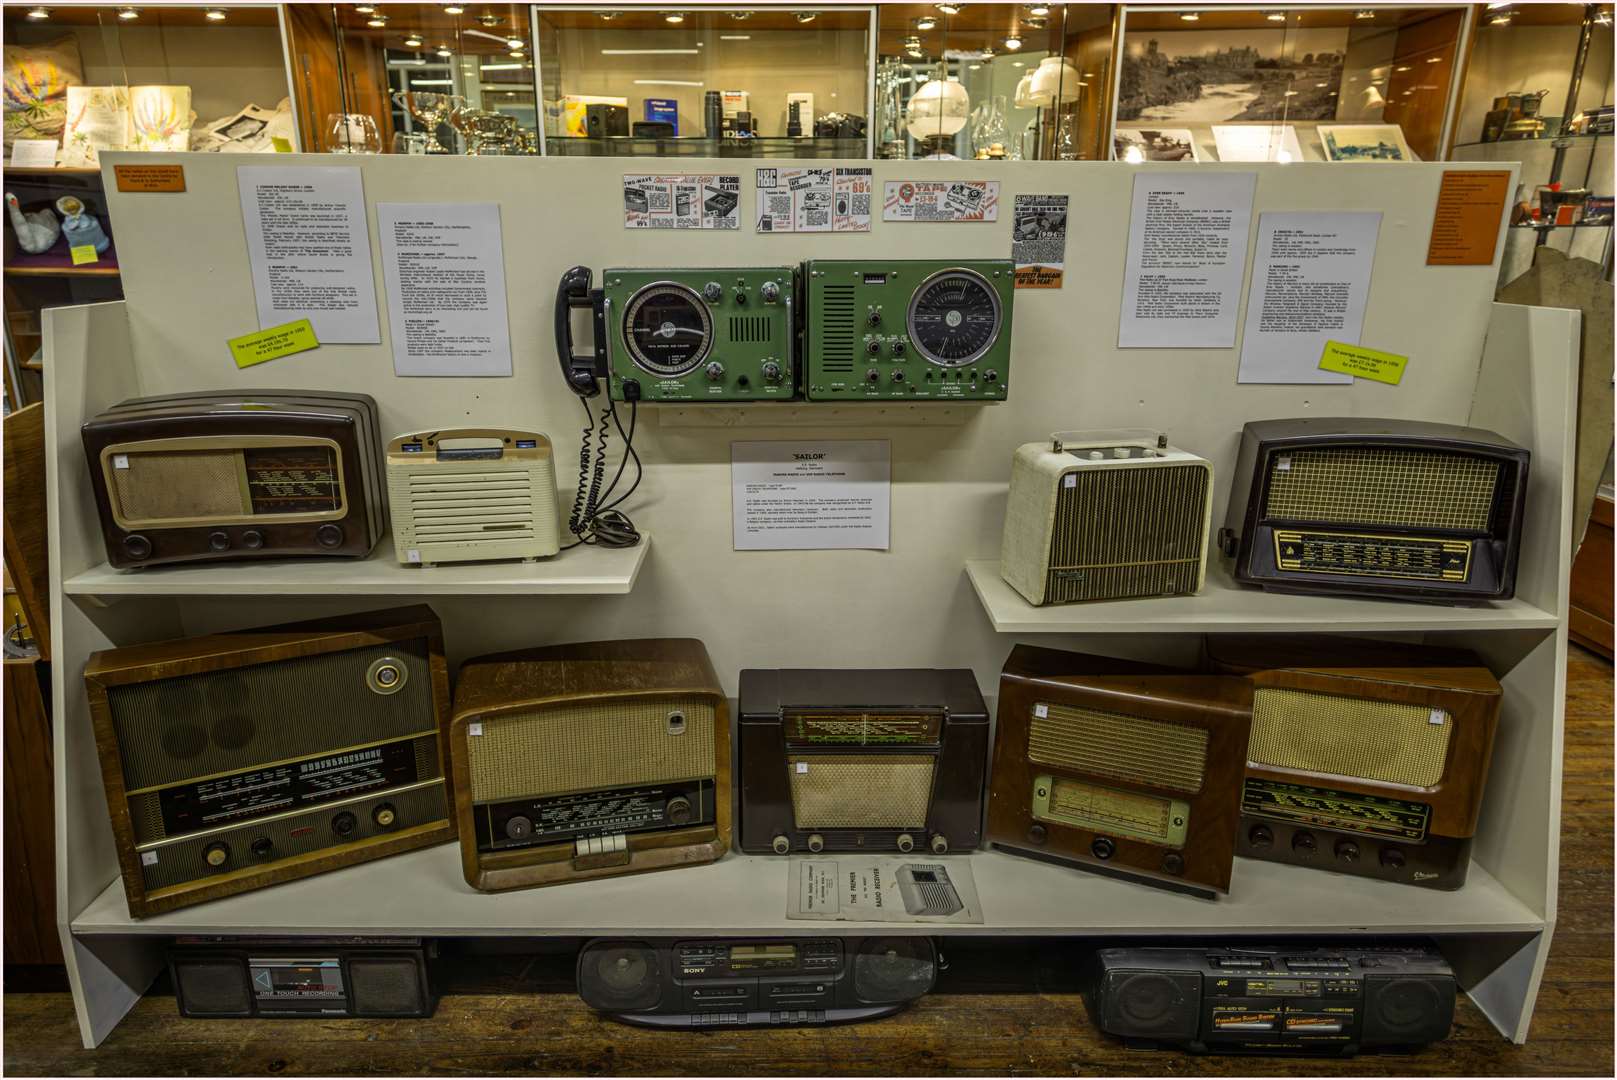 Neil Holden turned his attention to old radios at the heritage centre.